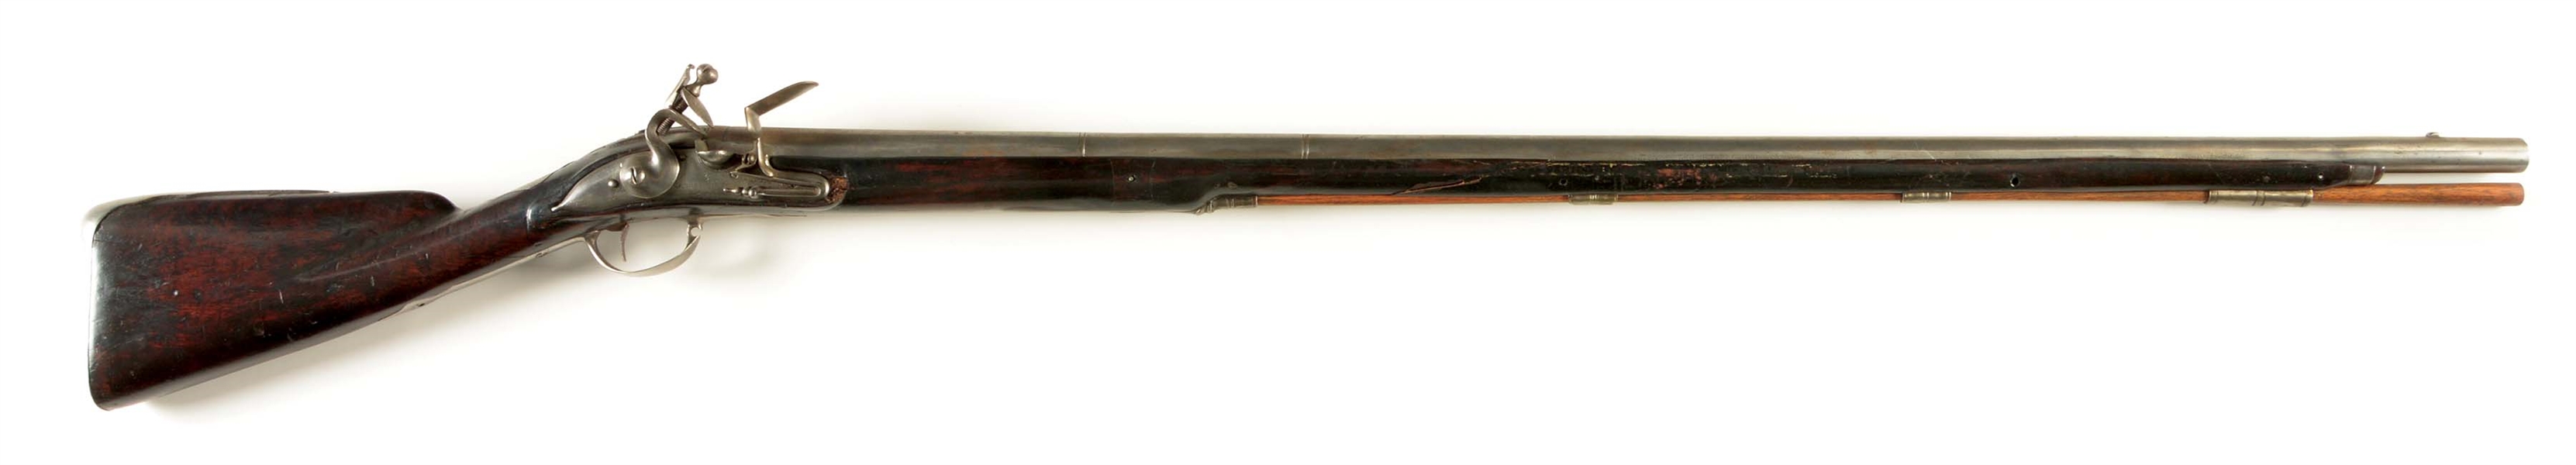 (A) SCARCE COMMITTEE OF CORRESPONDENCE MARKED IRON MOUNTED FLINTLOCK MUSKET MARKED P. BADDELEY.